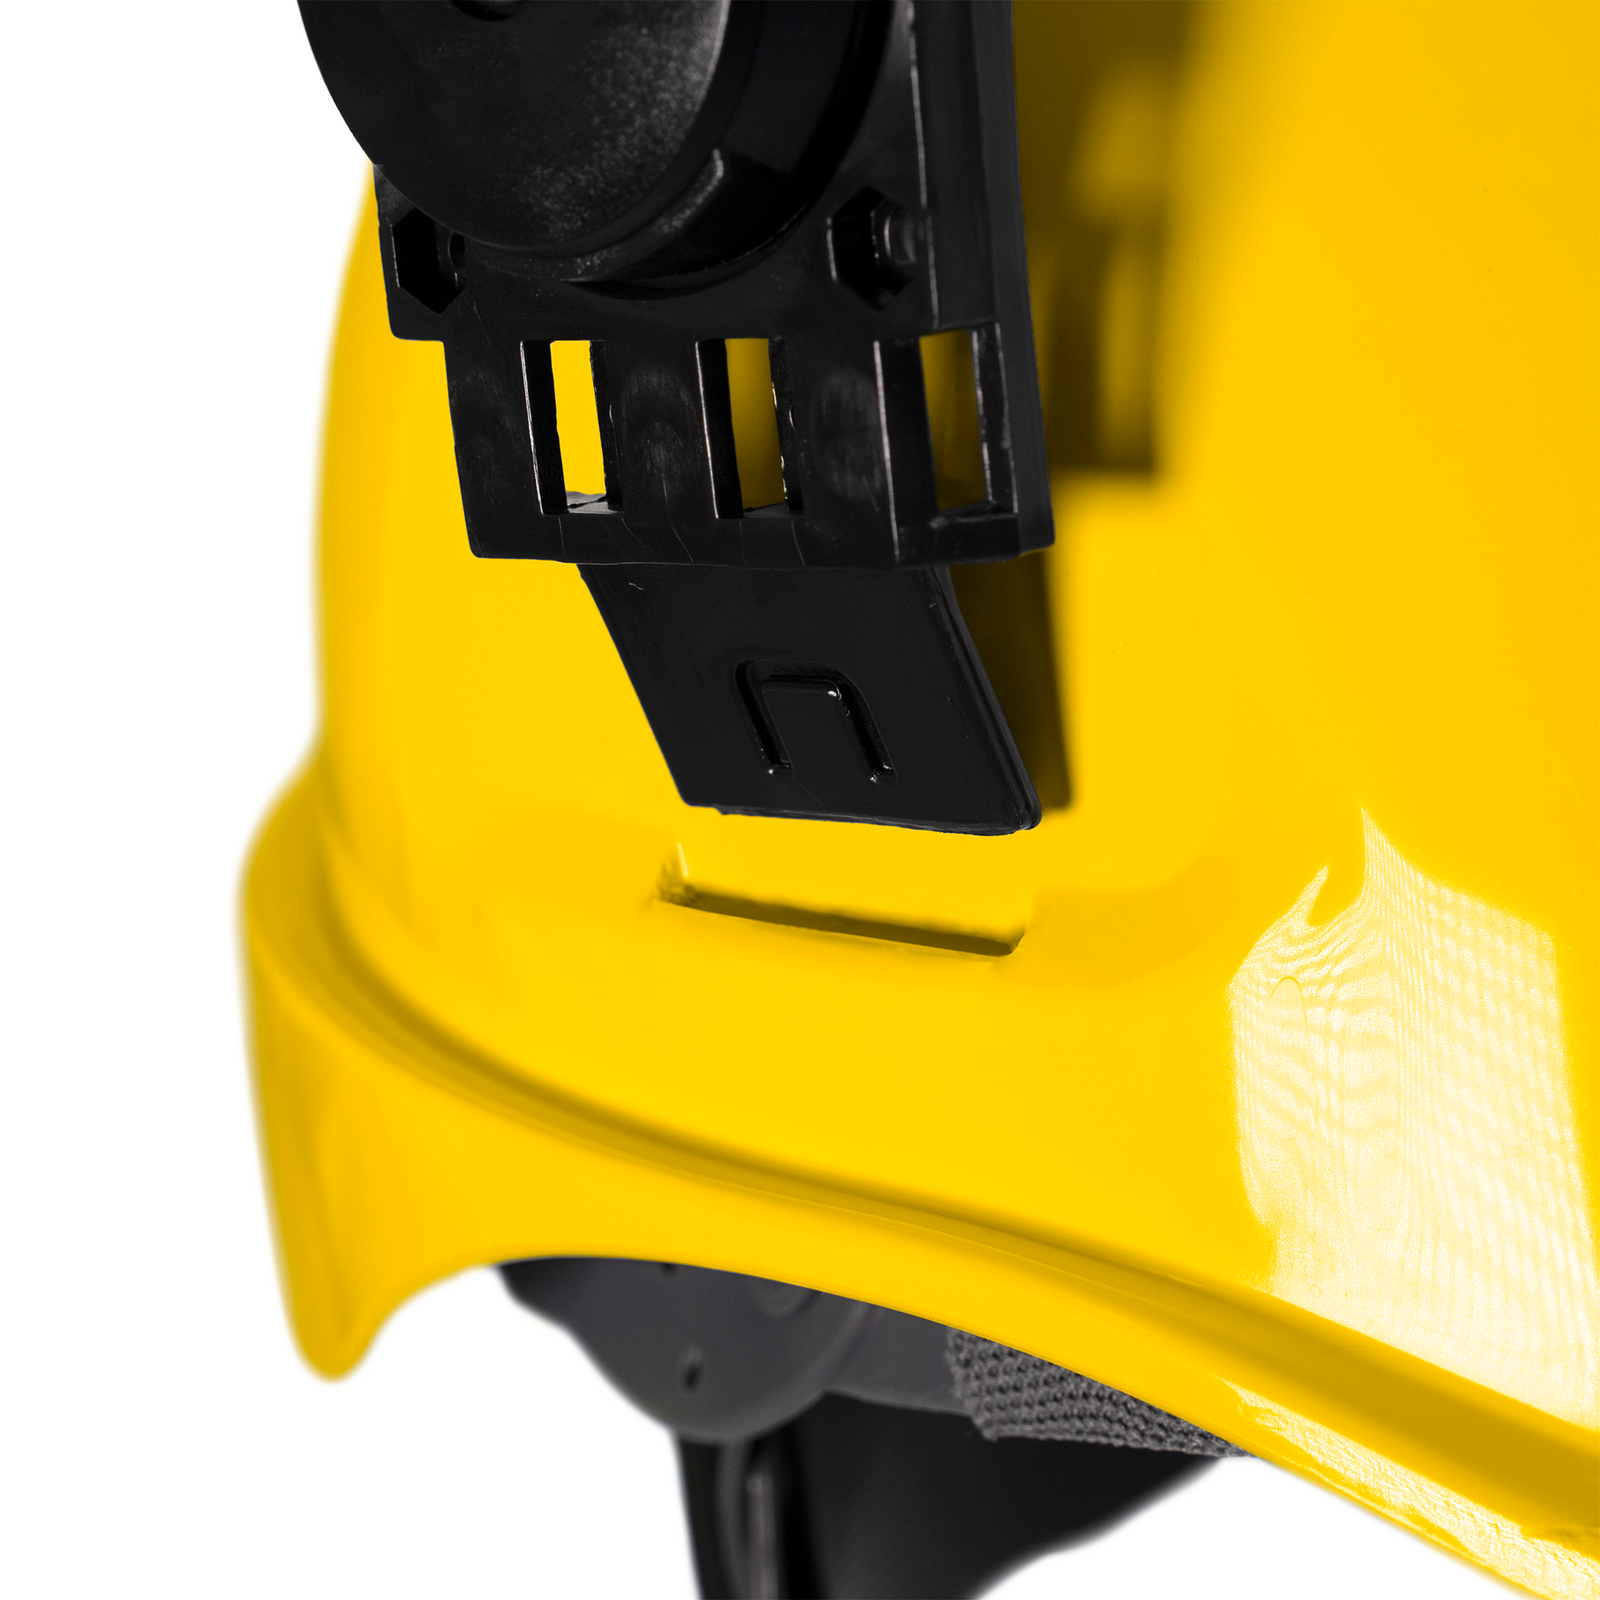 Hard Hat with universal slots to mount accessories